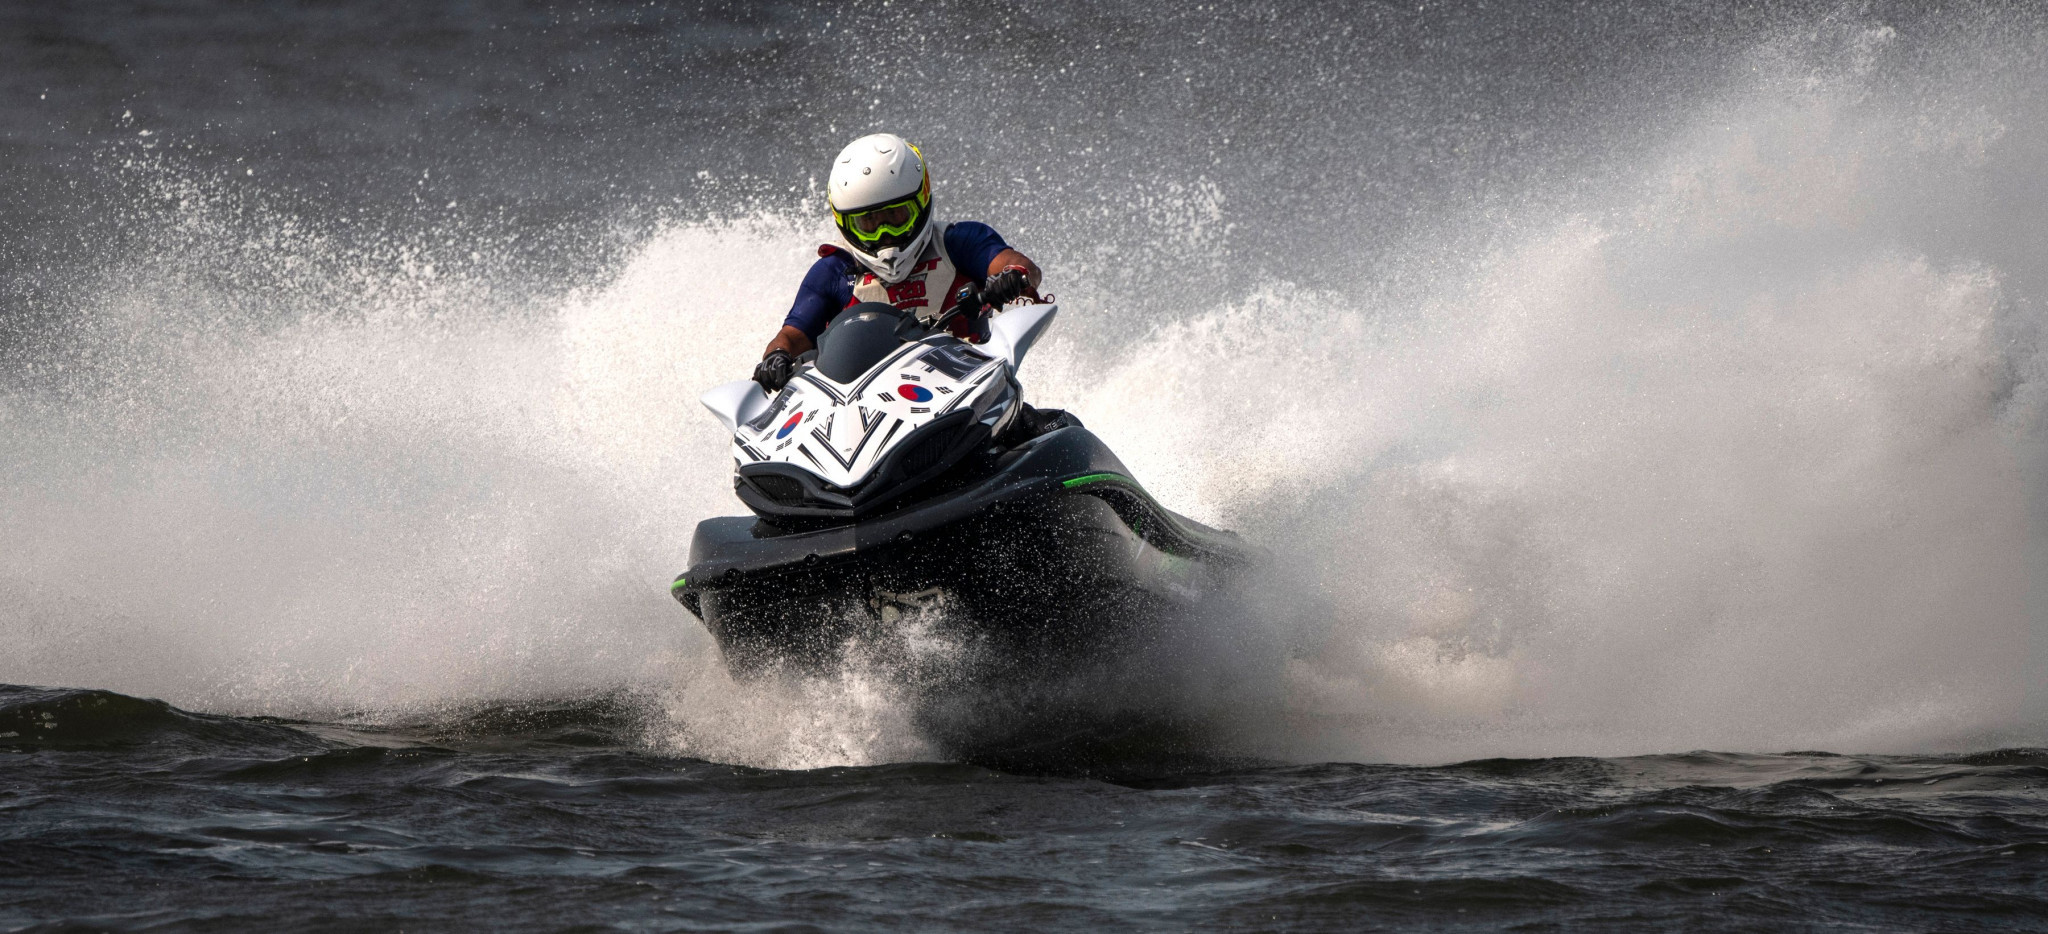 Two jetski golds were won today, in the runabout 1100 stock and ski modified categories  ©Getty Images